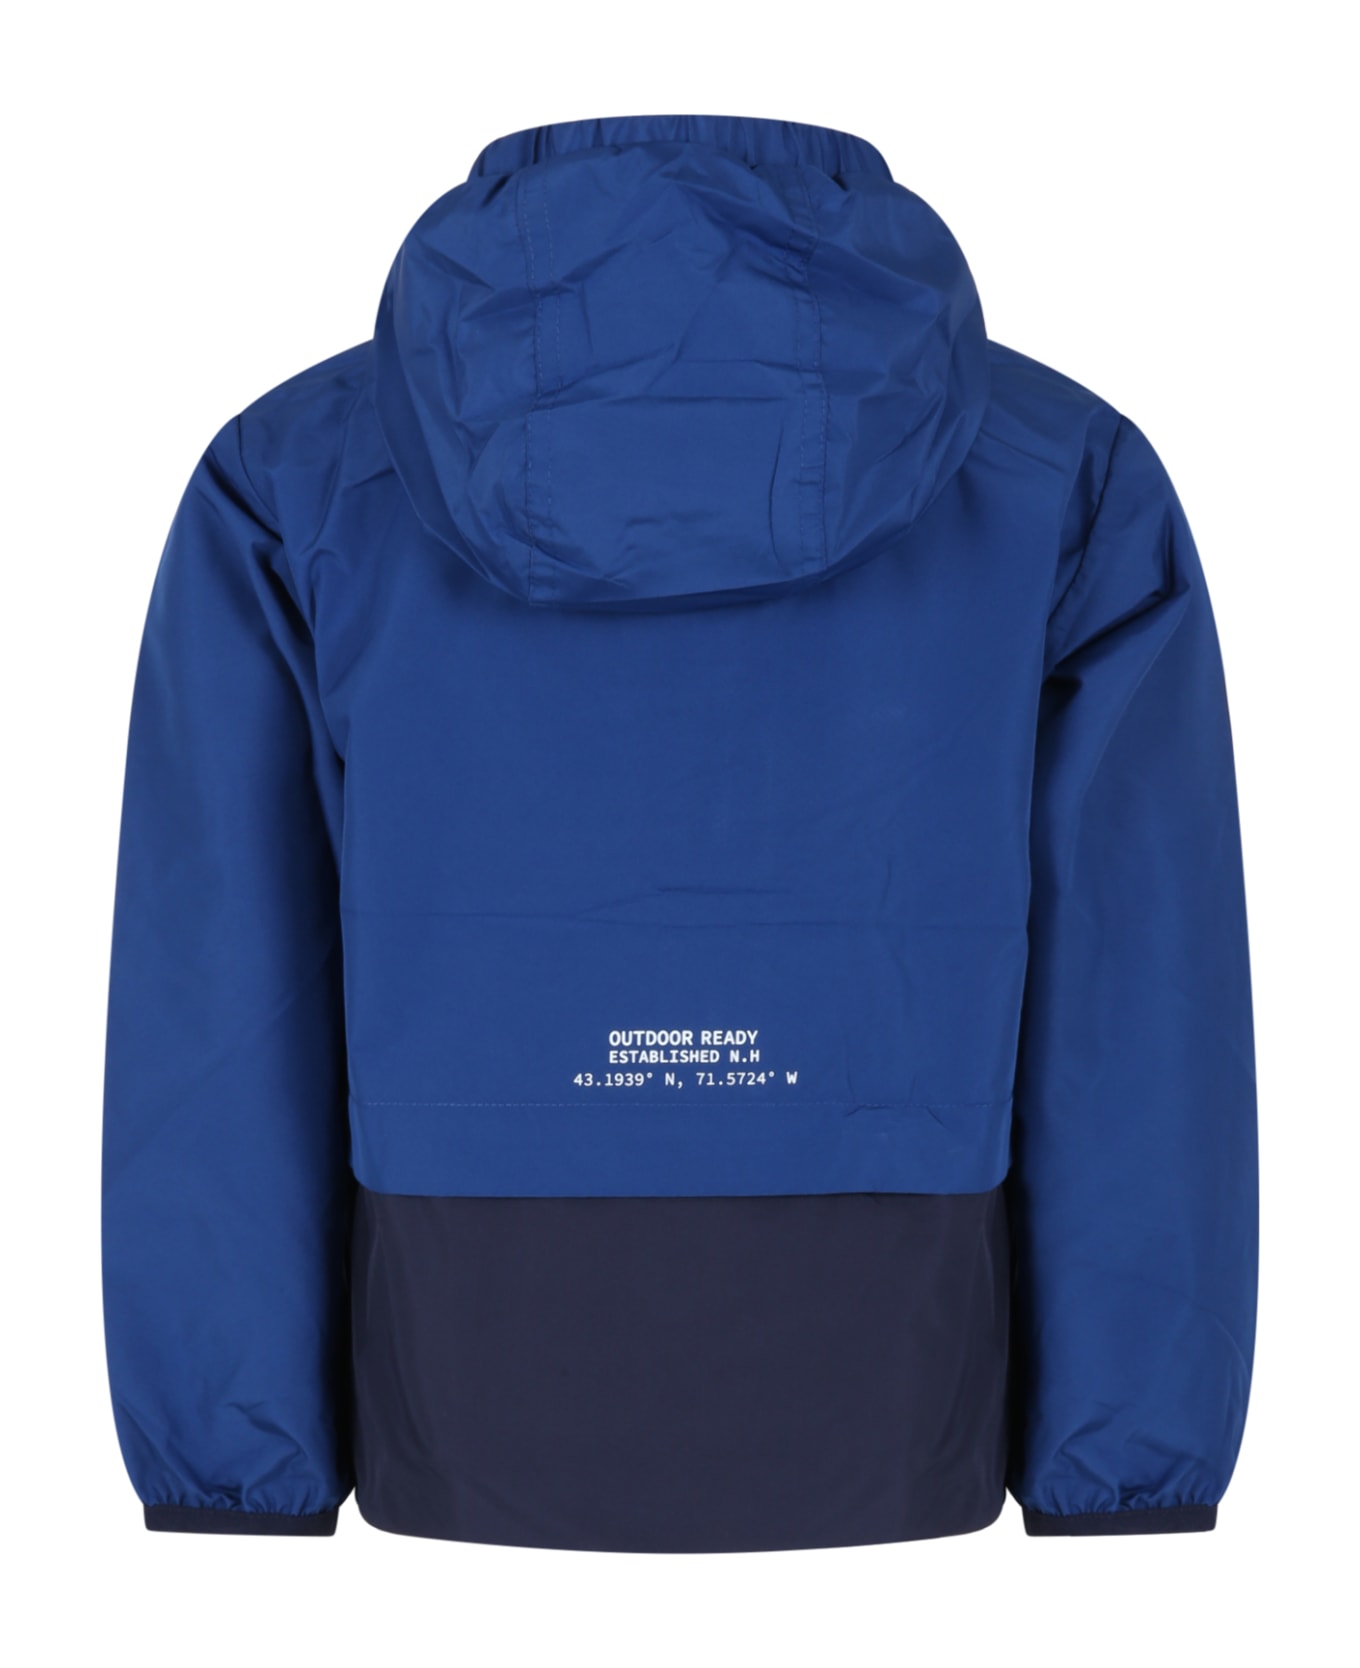 Timberland Blue Windbreaker For Boy With White Logo - Blue